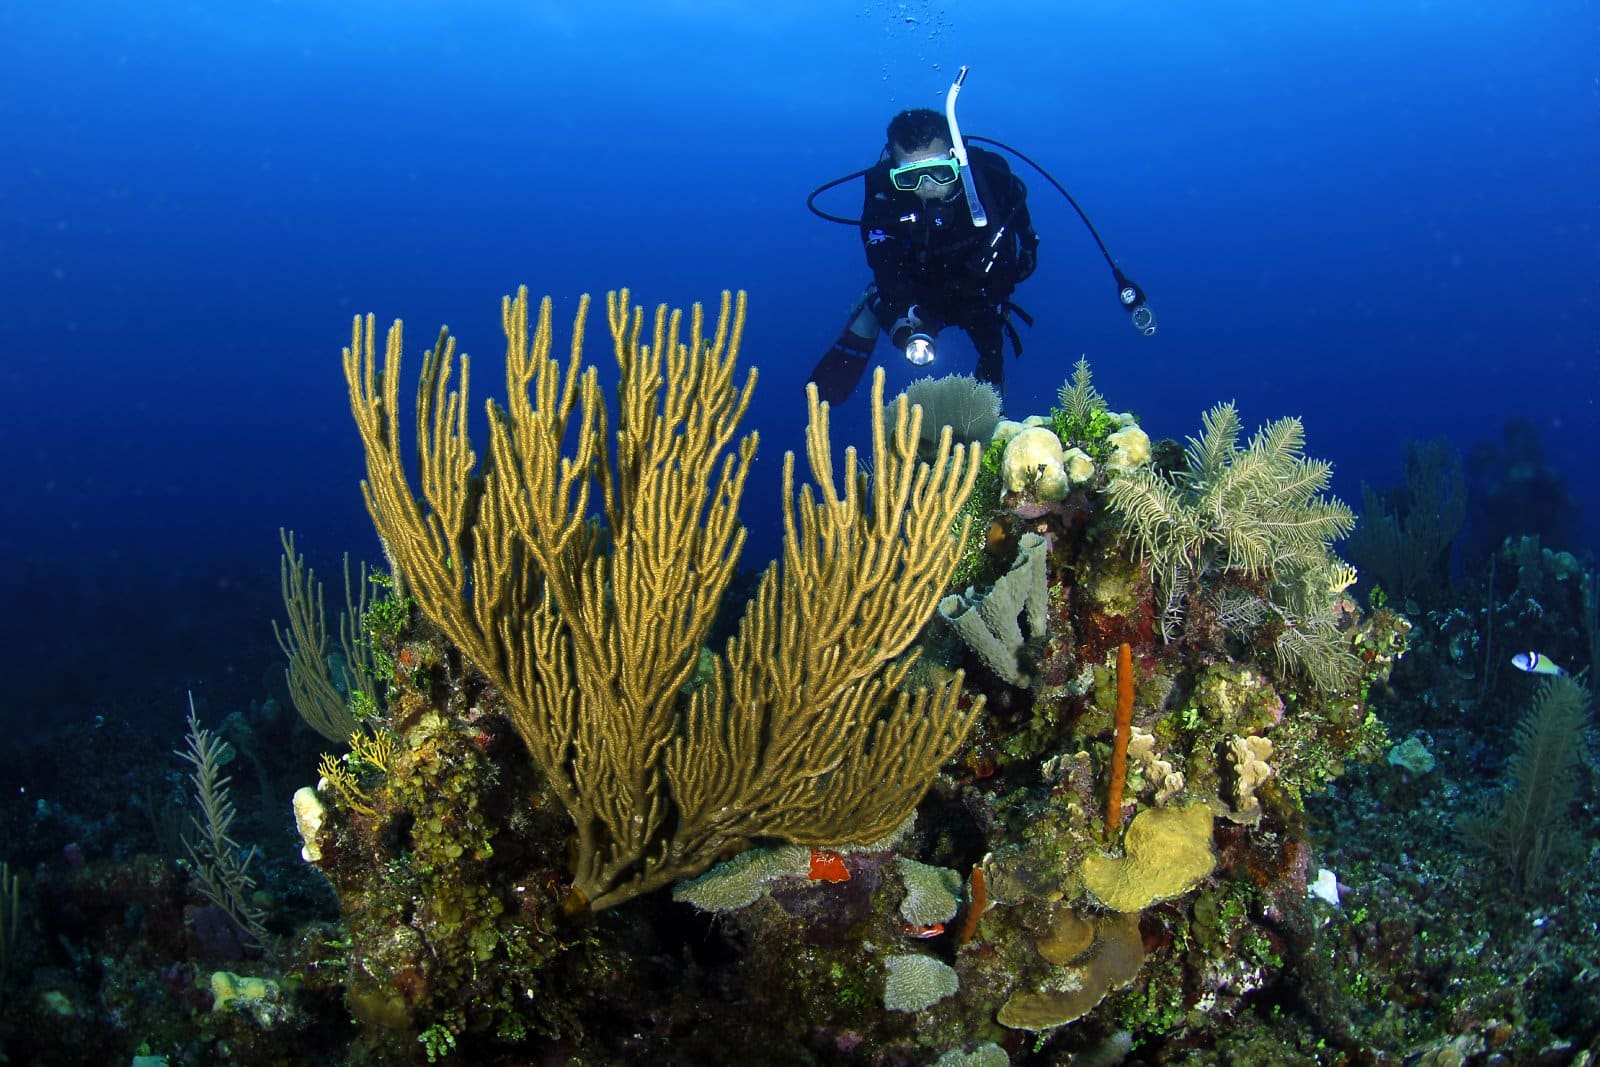 <p class="wp-caption-text">Image Credit: Shutterstock / Luiz A. Rocha</p>  <p><span>The Belize Barrier Reef, a UNESCO World Heritage site, is the second-largest coral reef system in the world. This underwater paradise is home to coral atolls, mangrove forests, and hundreds of islands, offering some of the best snorkeling and diving experiences globally. The reef is a biodiversity hotspot, home to an array of marine life, including endangered species like the West Indian manatee and the hawksbill turtle. Sites like the Great Blue Hole and Hol Chan Marine Reserve showcase the reef’s geological wonders and vibrant aquatic ecosystems.</span></p>